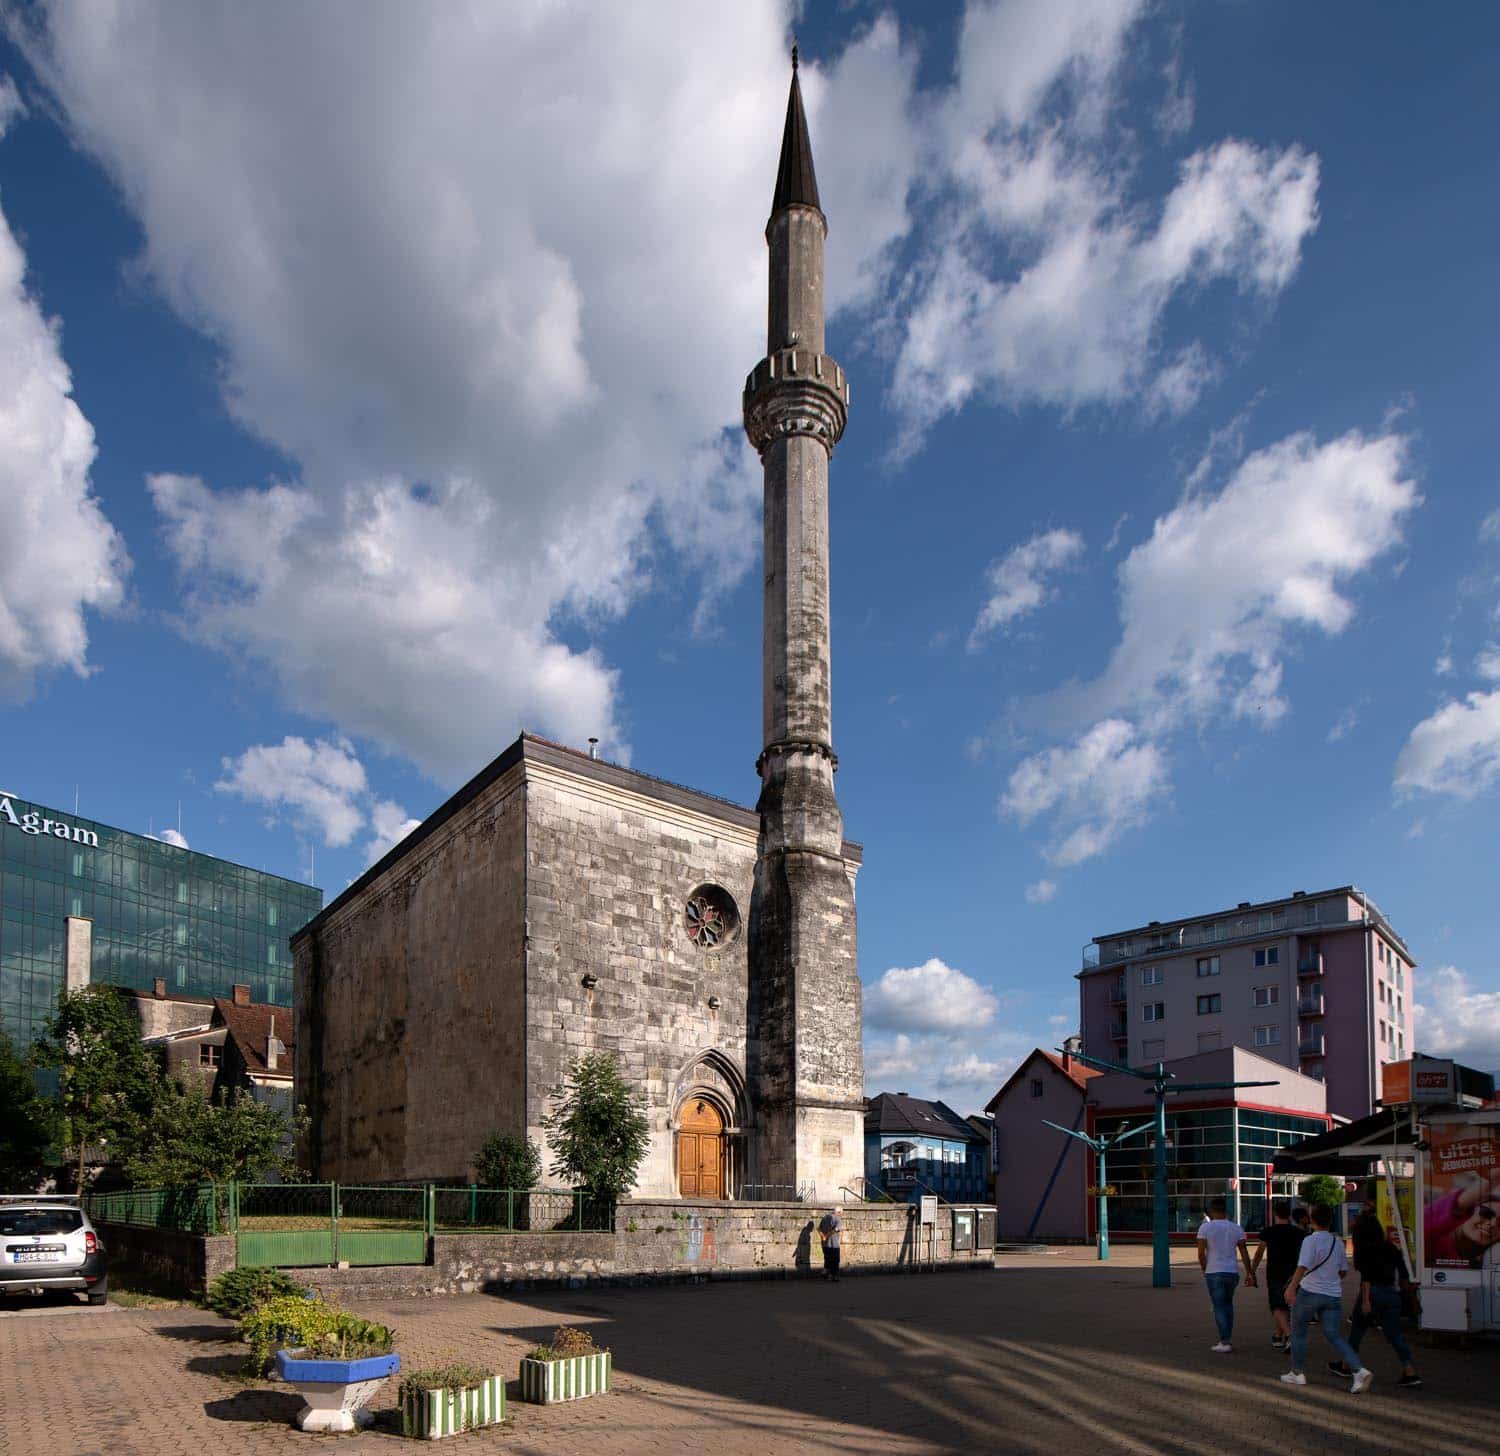 What to see in Bihac - Fethiye Mosque